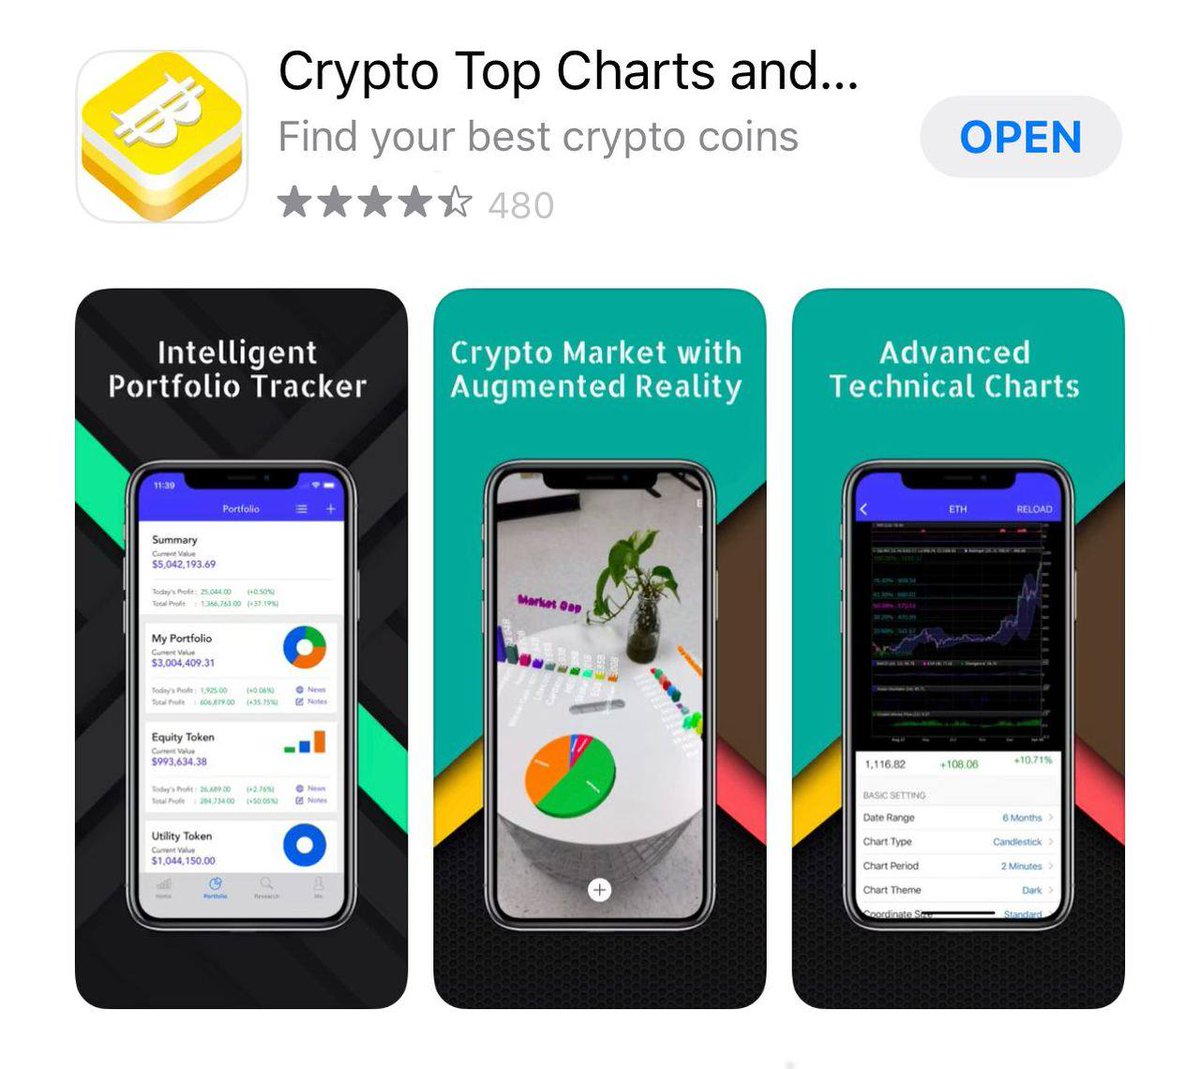 CryptoTopCharts tweet picture